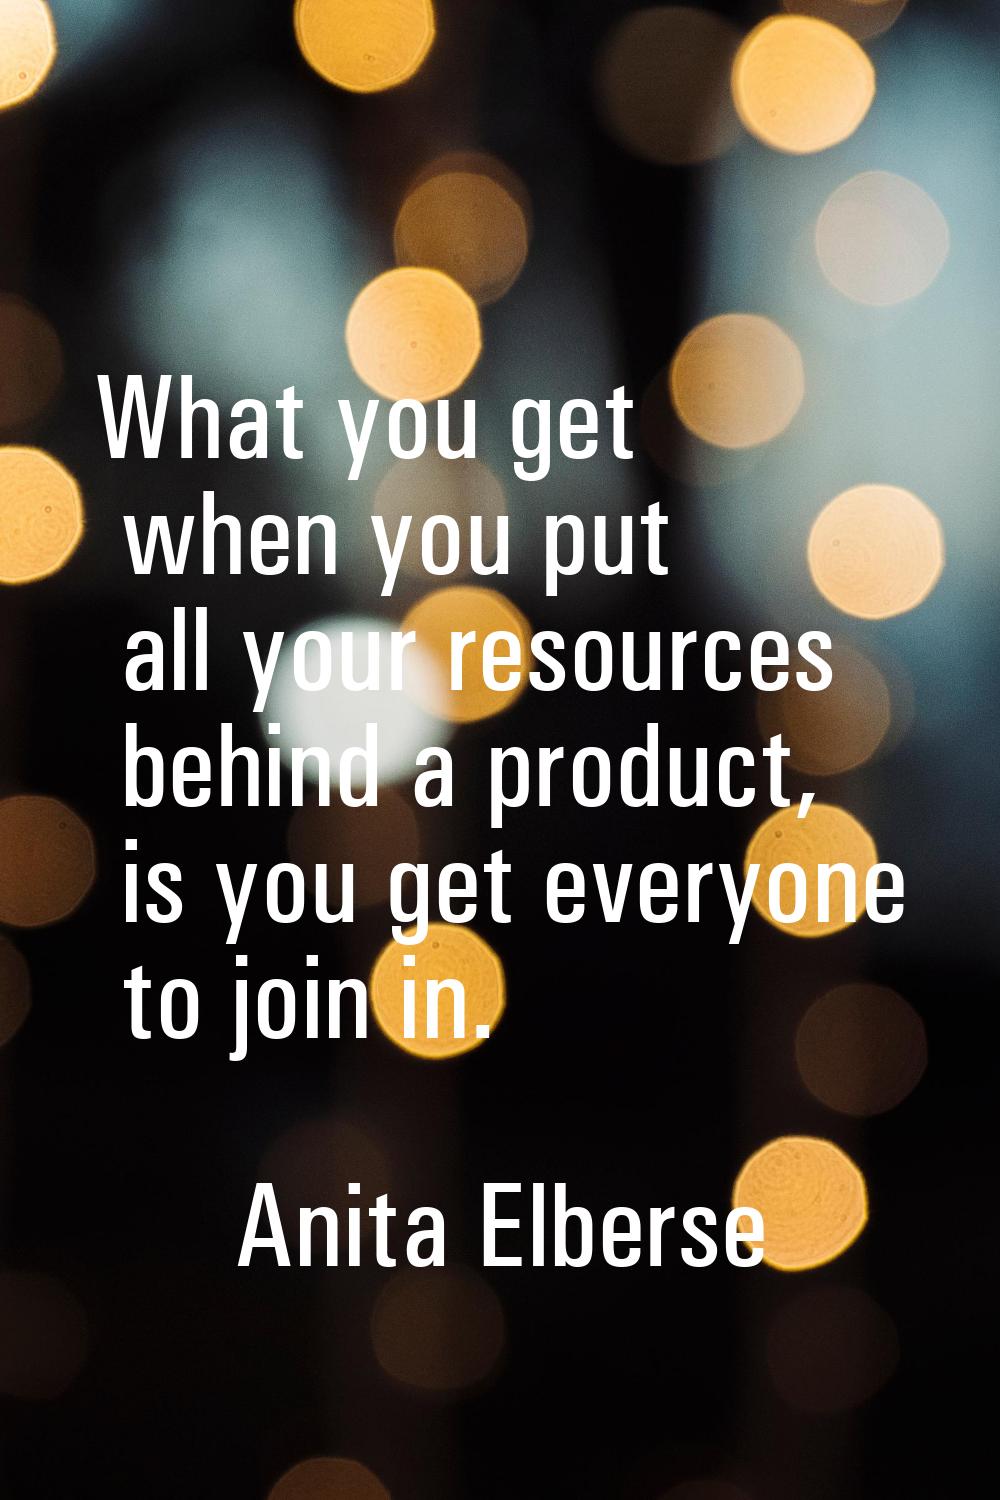 What you get when you put all your resources behind a product, is you get everyone to join in.